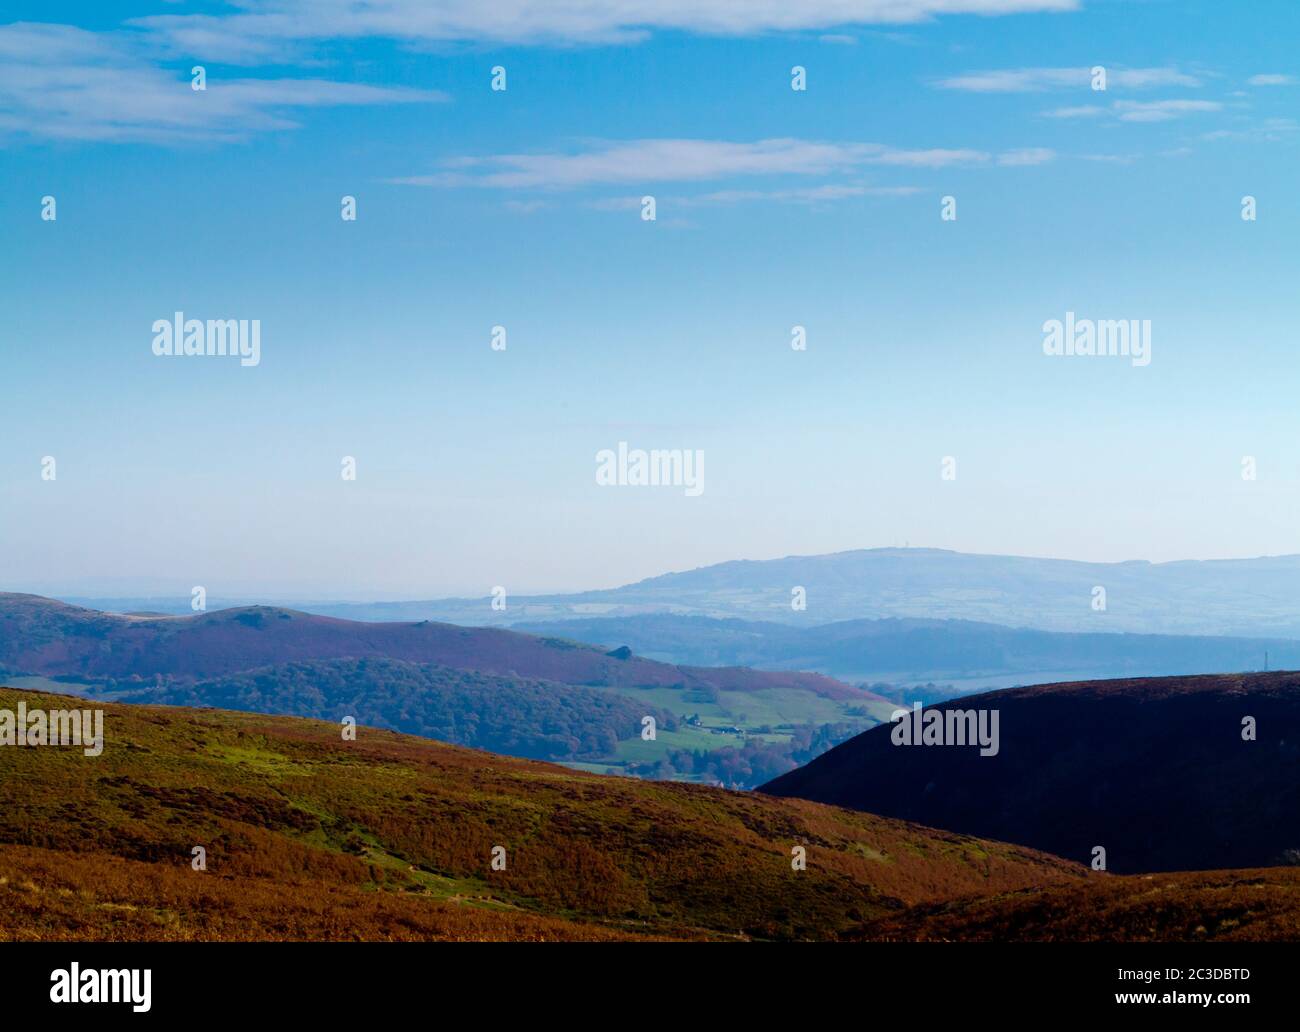 View of the Shropshire Hills near the Long Mynd an area of outstanding natural beauty in the north midlands England UK Stock Photo